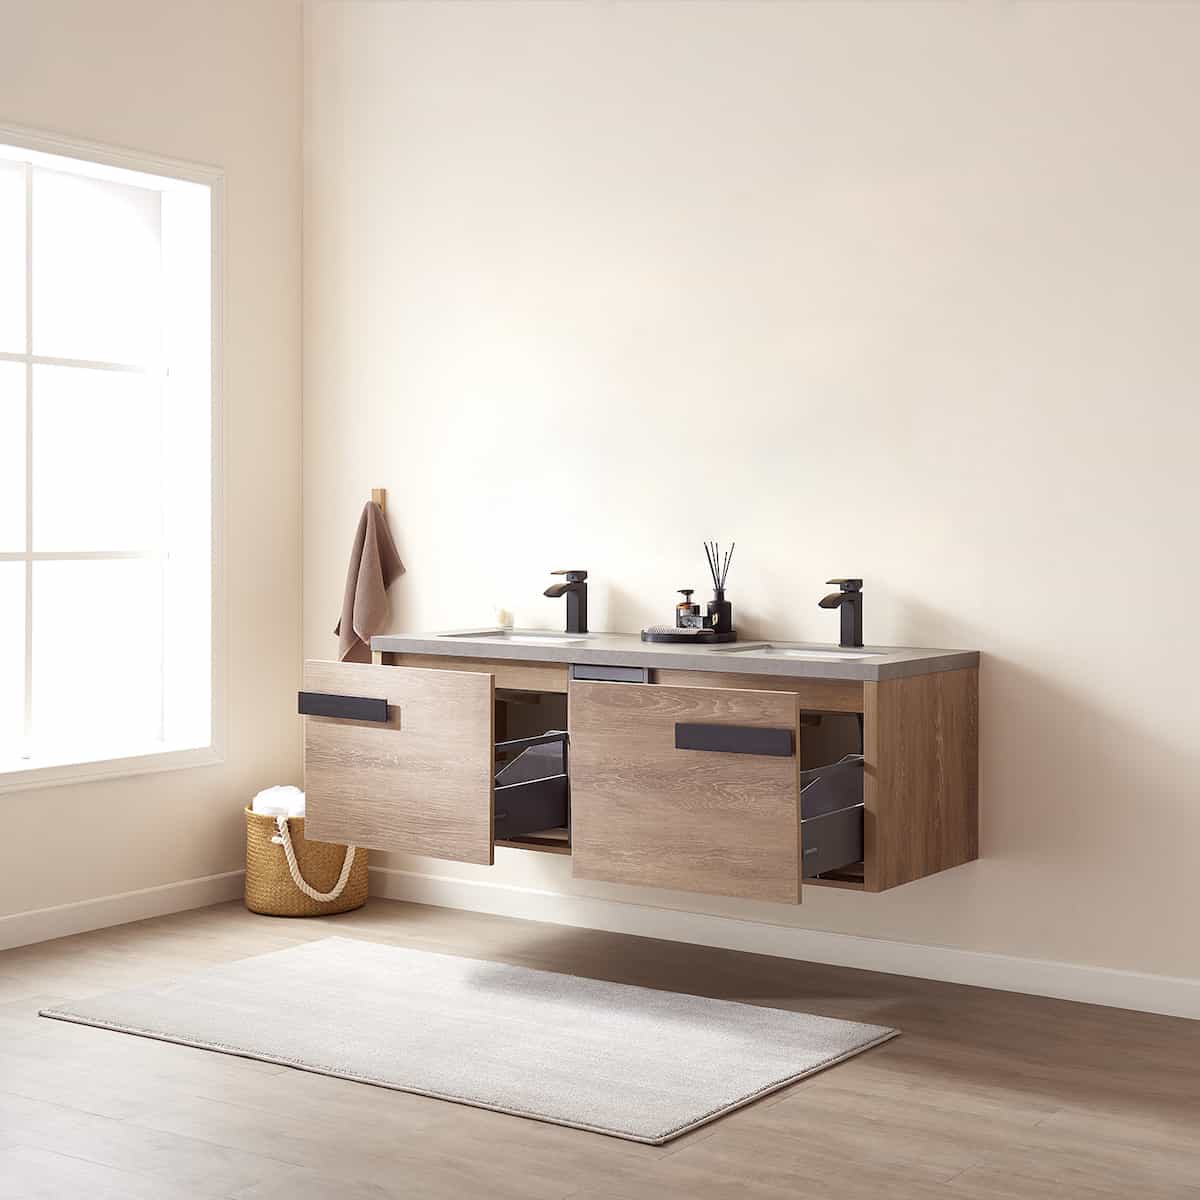 Vinnova Carcastillo 63 Inch Wall Mount Single Sink Vanity in North American Oak with Grey Sintered Stone Top Without Mirror Drawers 703263-NO-WK-NM #mirror_without mirror